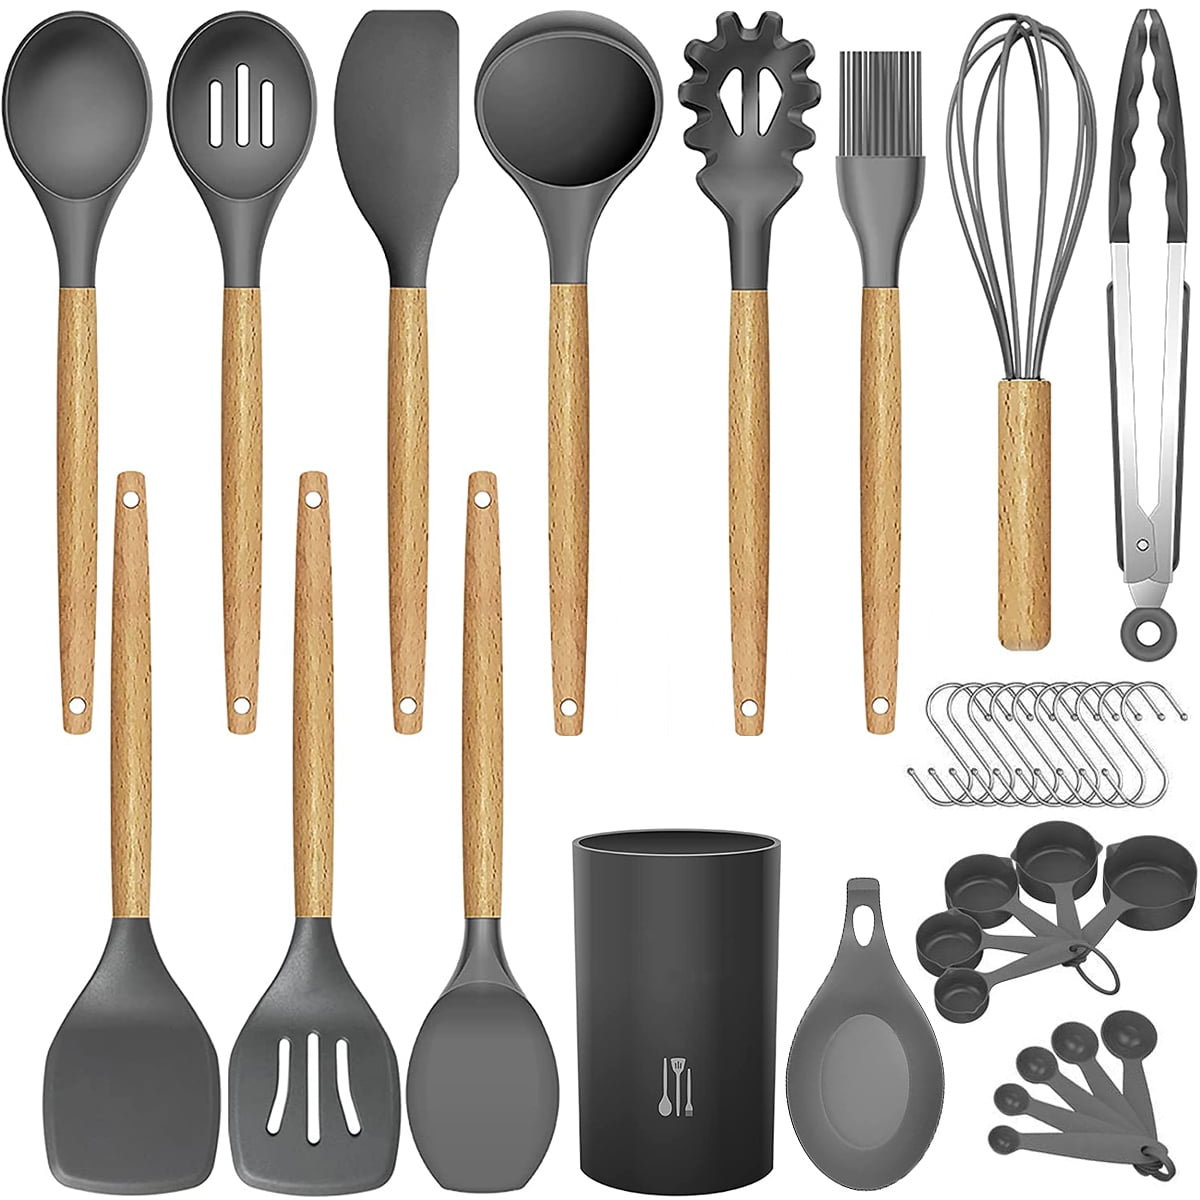 Silicone Cooking Utensils Set Spatula Set Non Toxic Heat Resistant Nonstick Silicone Handle,Easy To Clean Kitchen Cooking Utensils Set 10 Pcs Kitchen Utensil Set With Holder Black 